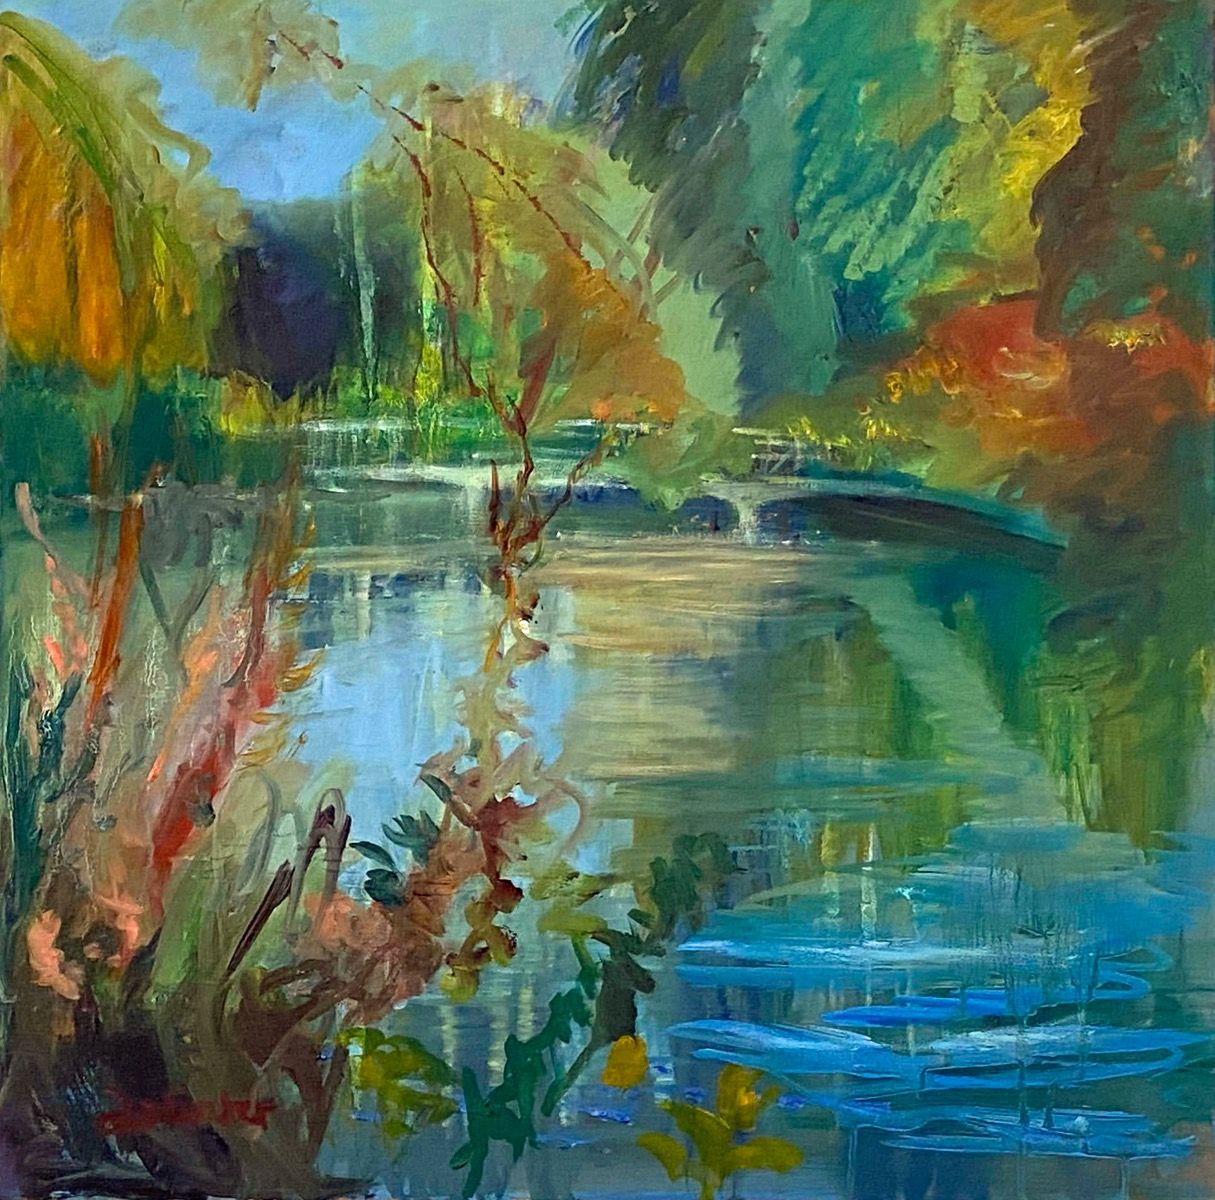 The Pond Turning to Autumn by Lynda Minter